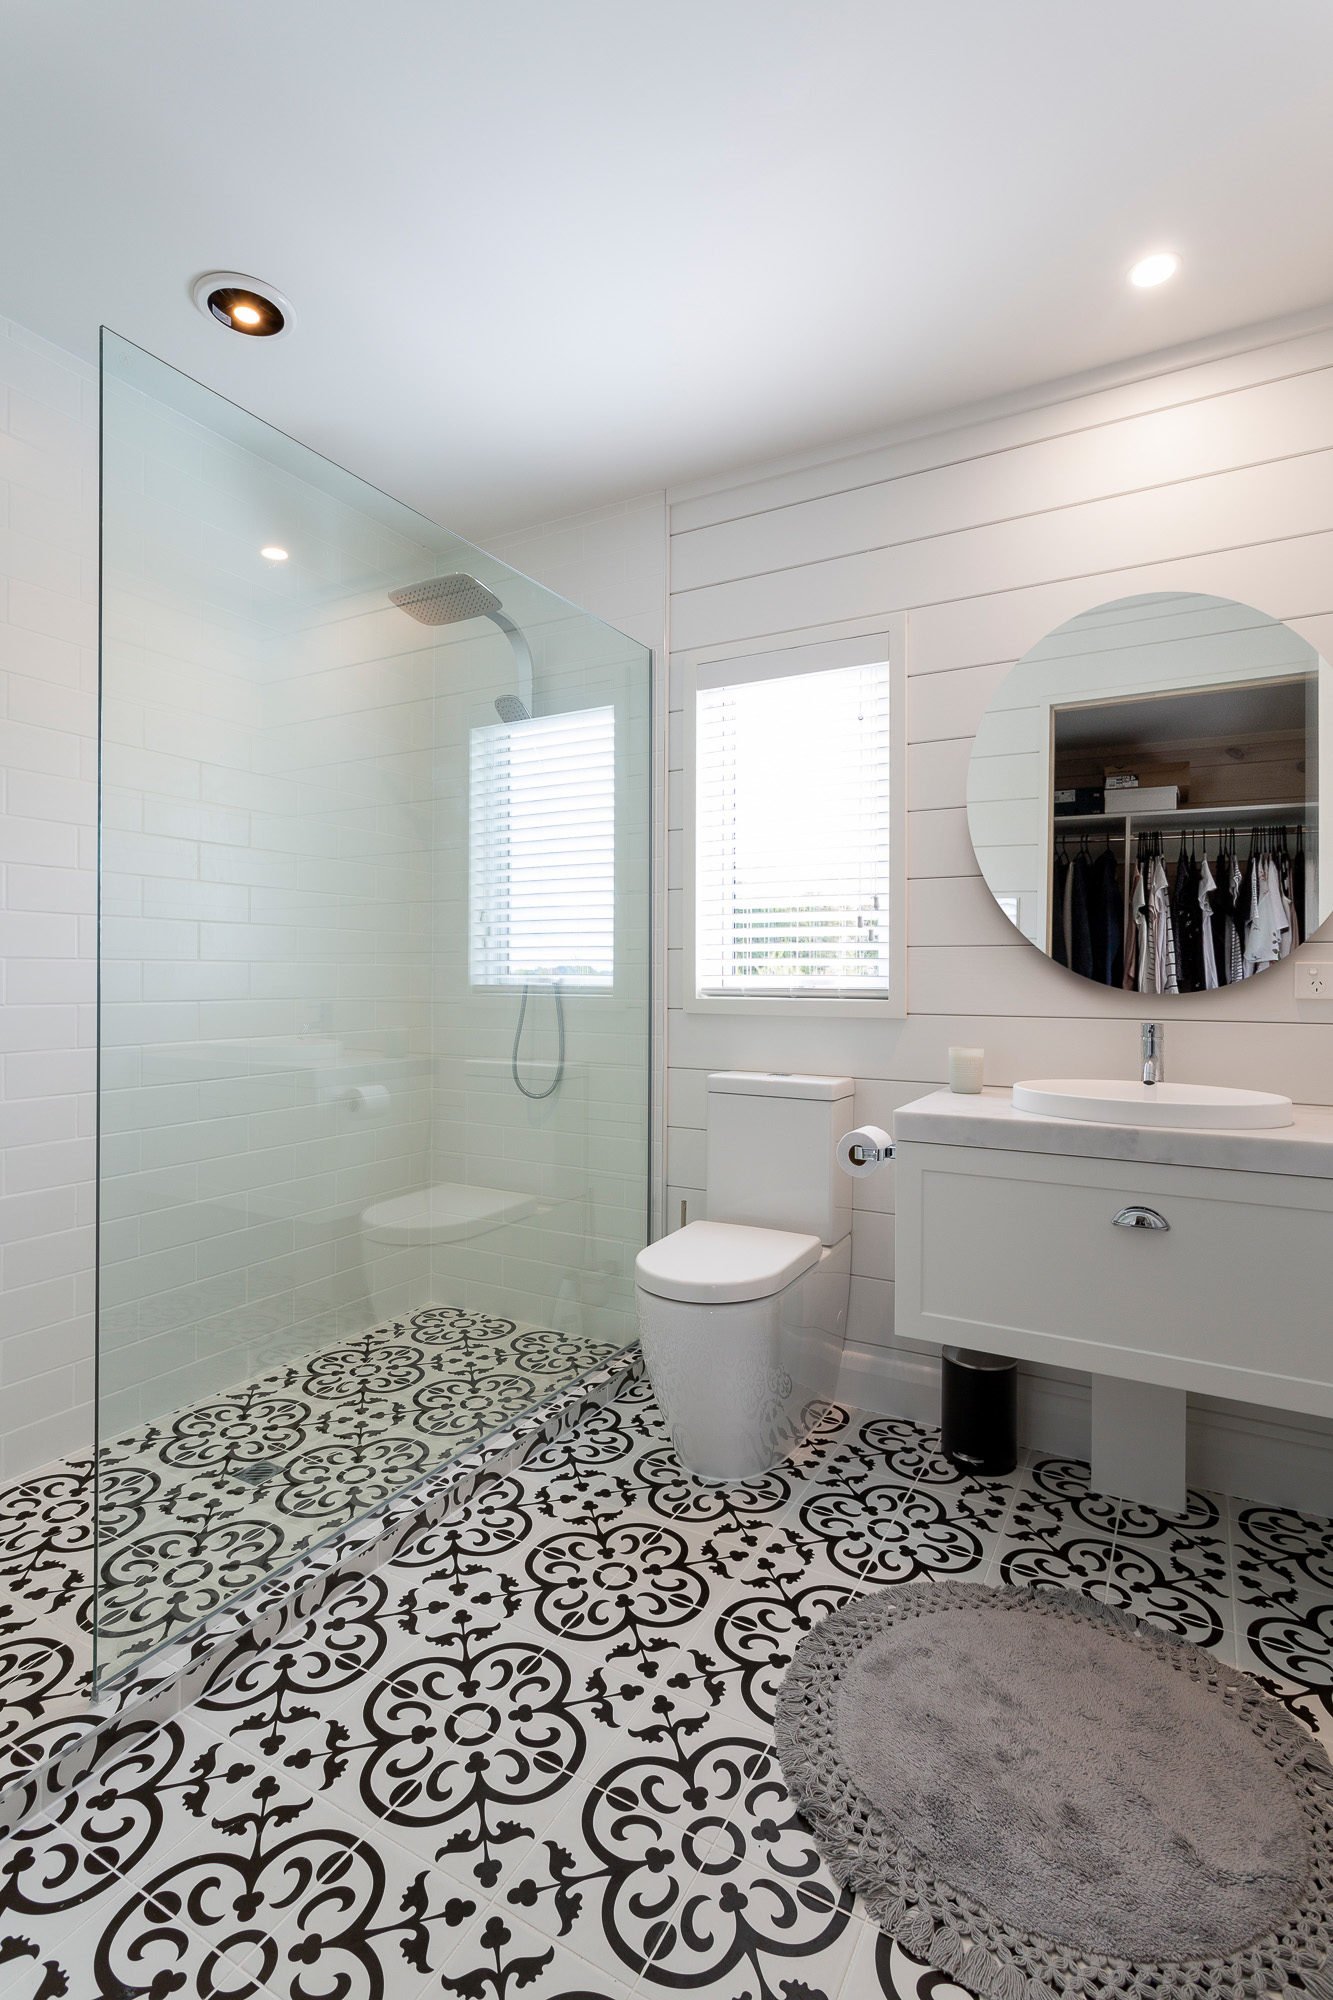 Fully painted Lockwood bathroom walls with black and white floor tiles